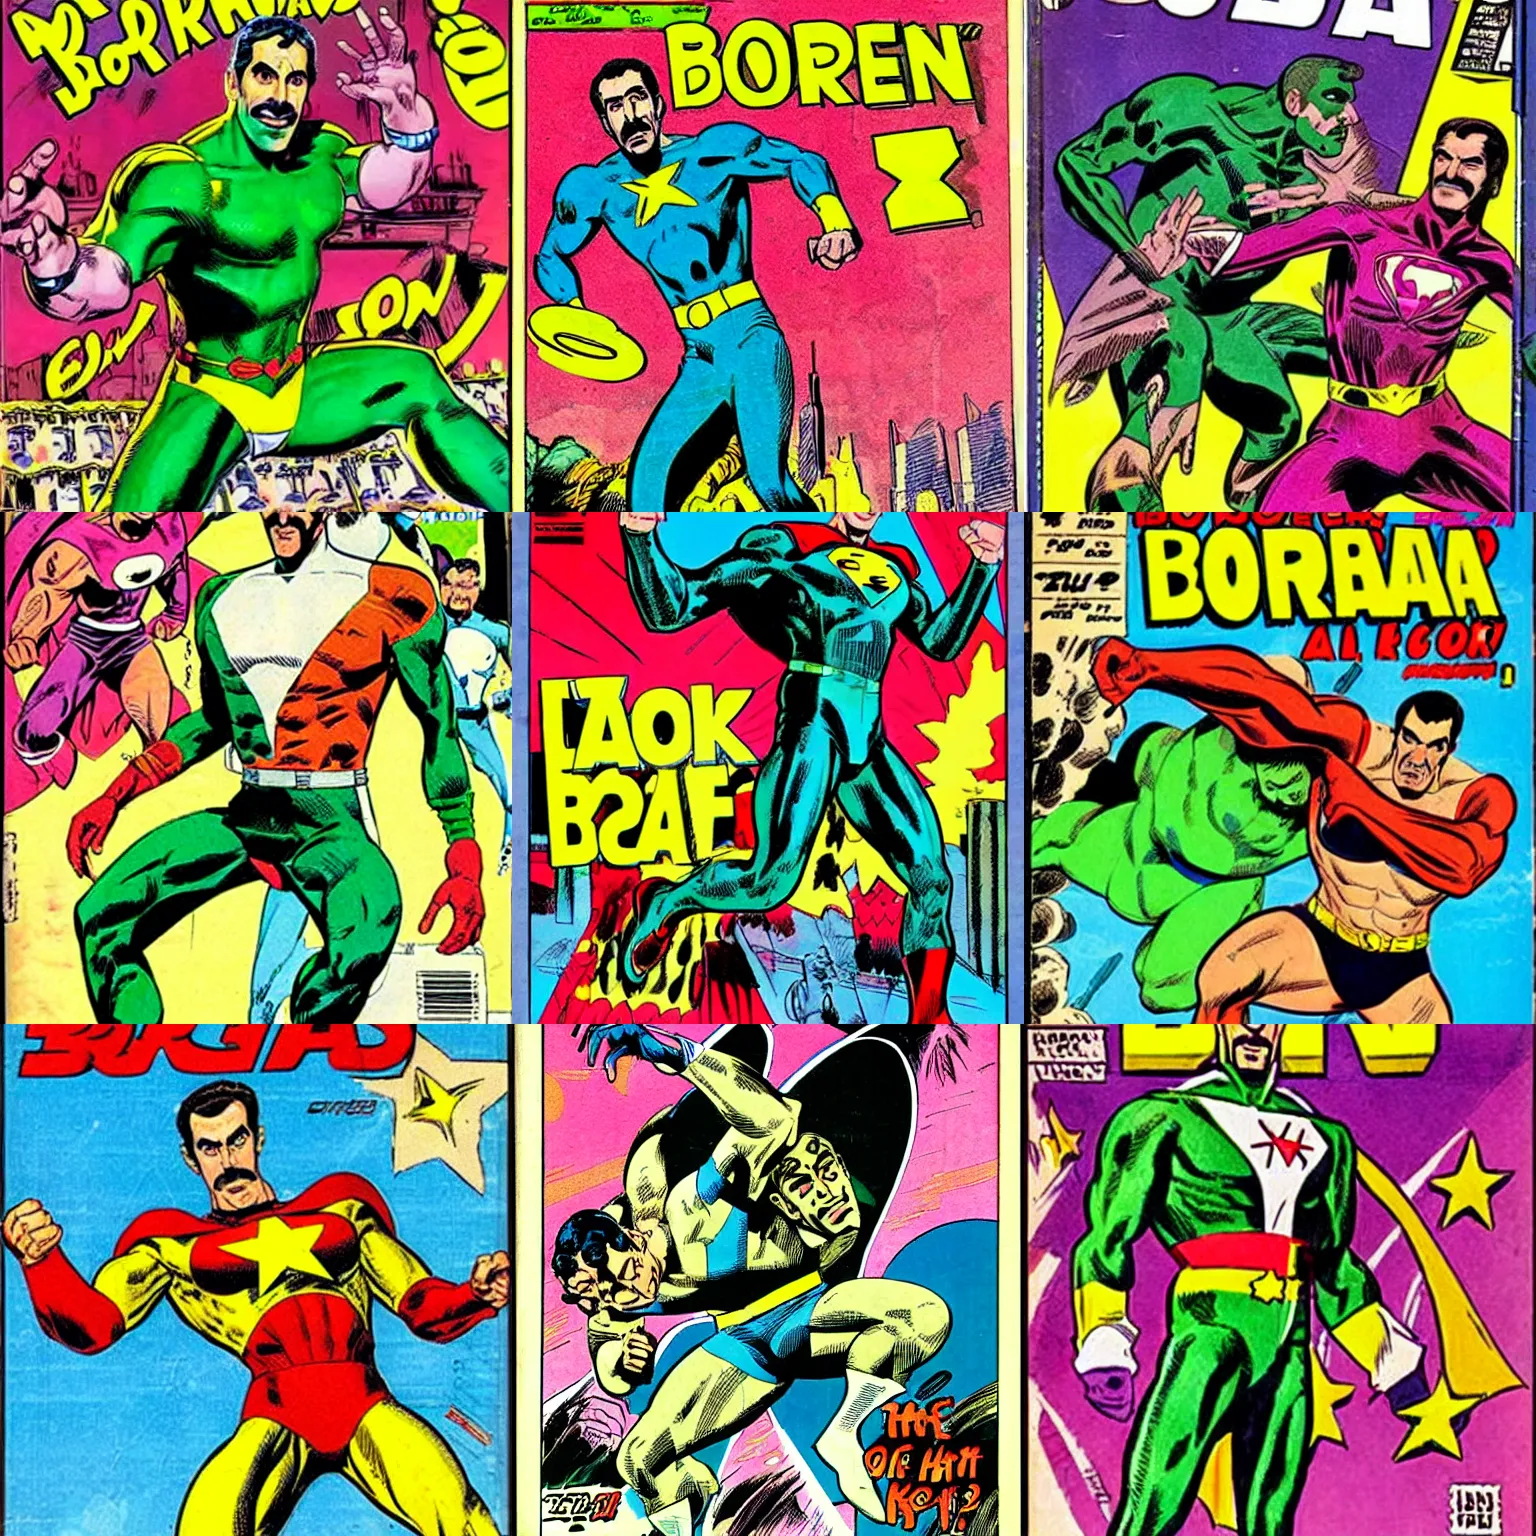 Prompt: the cover of a comic book depicting borat in a superhero pose. art by jack kirby.